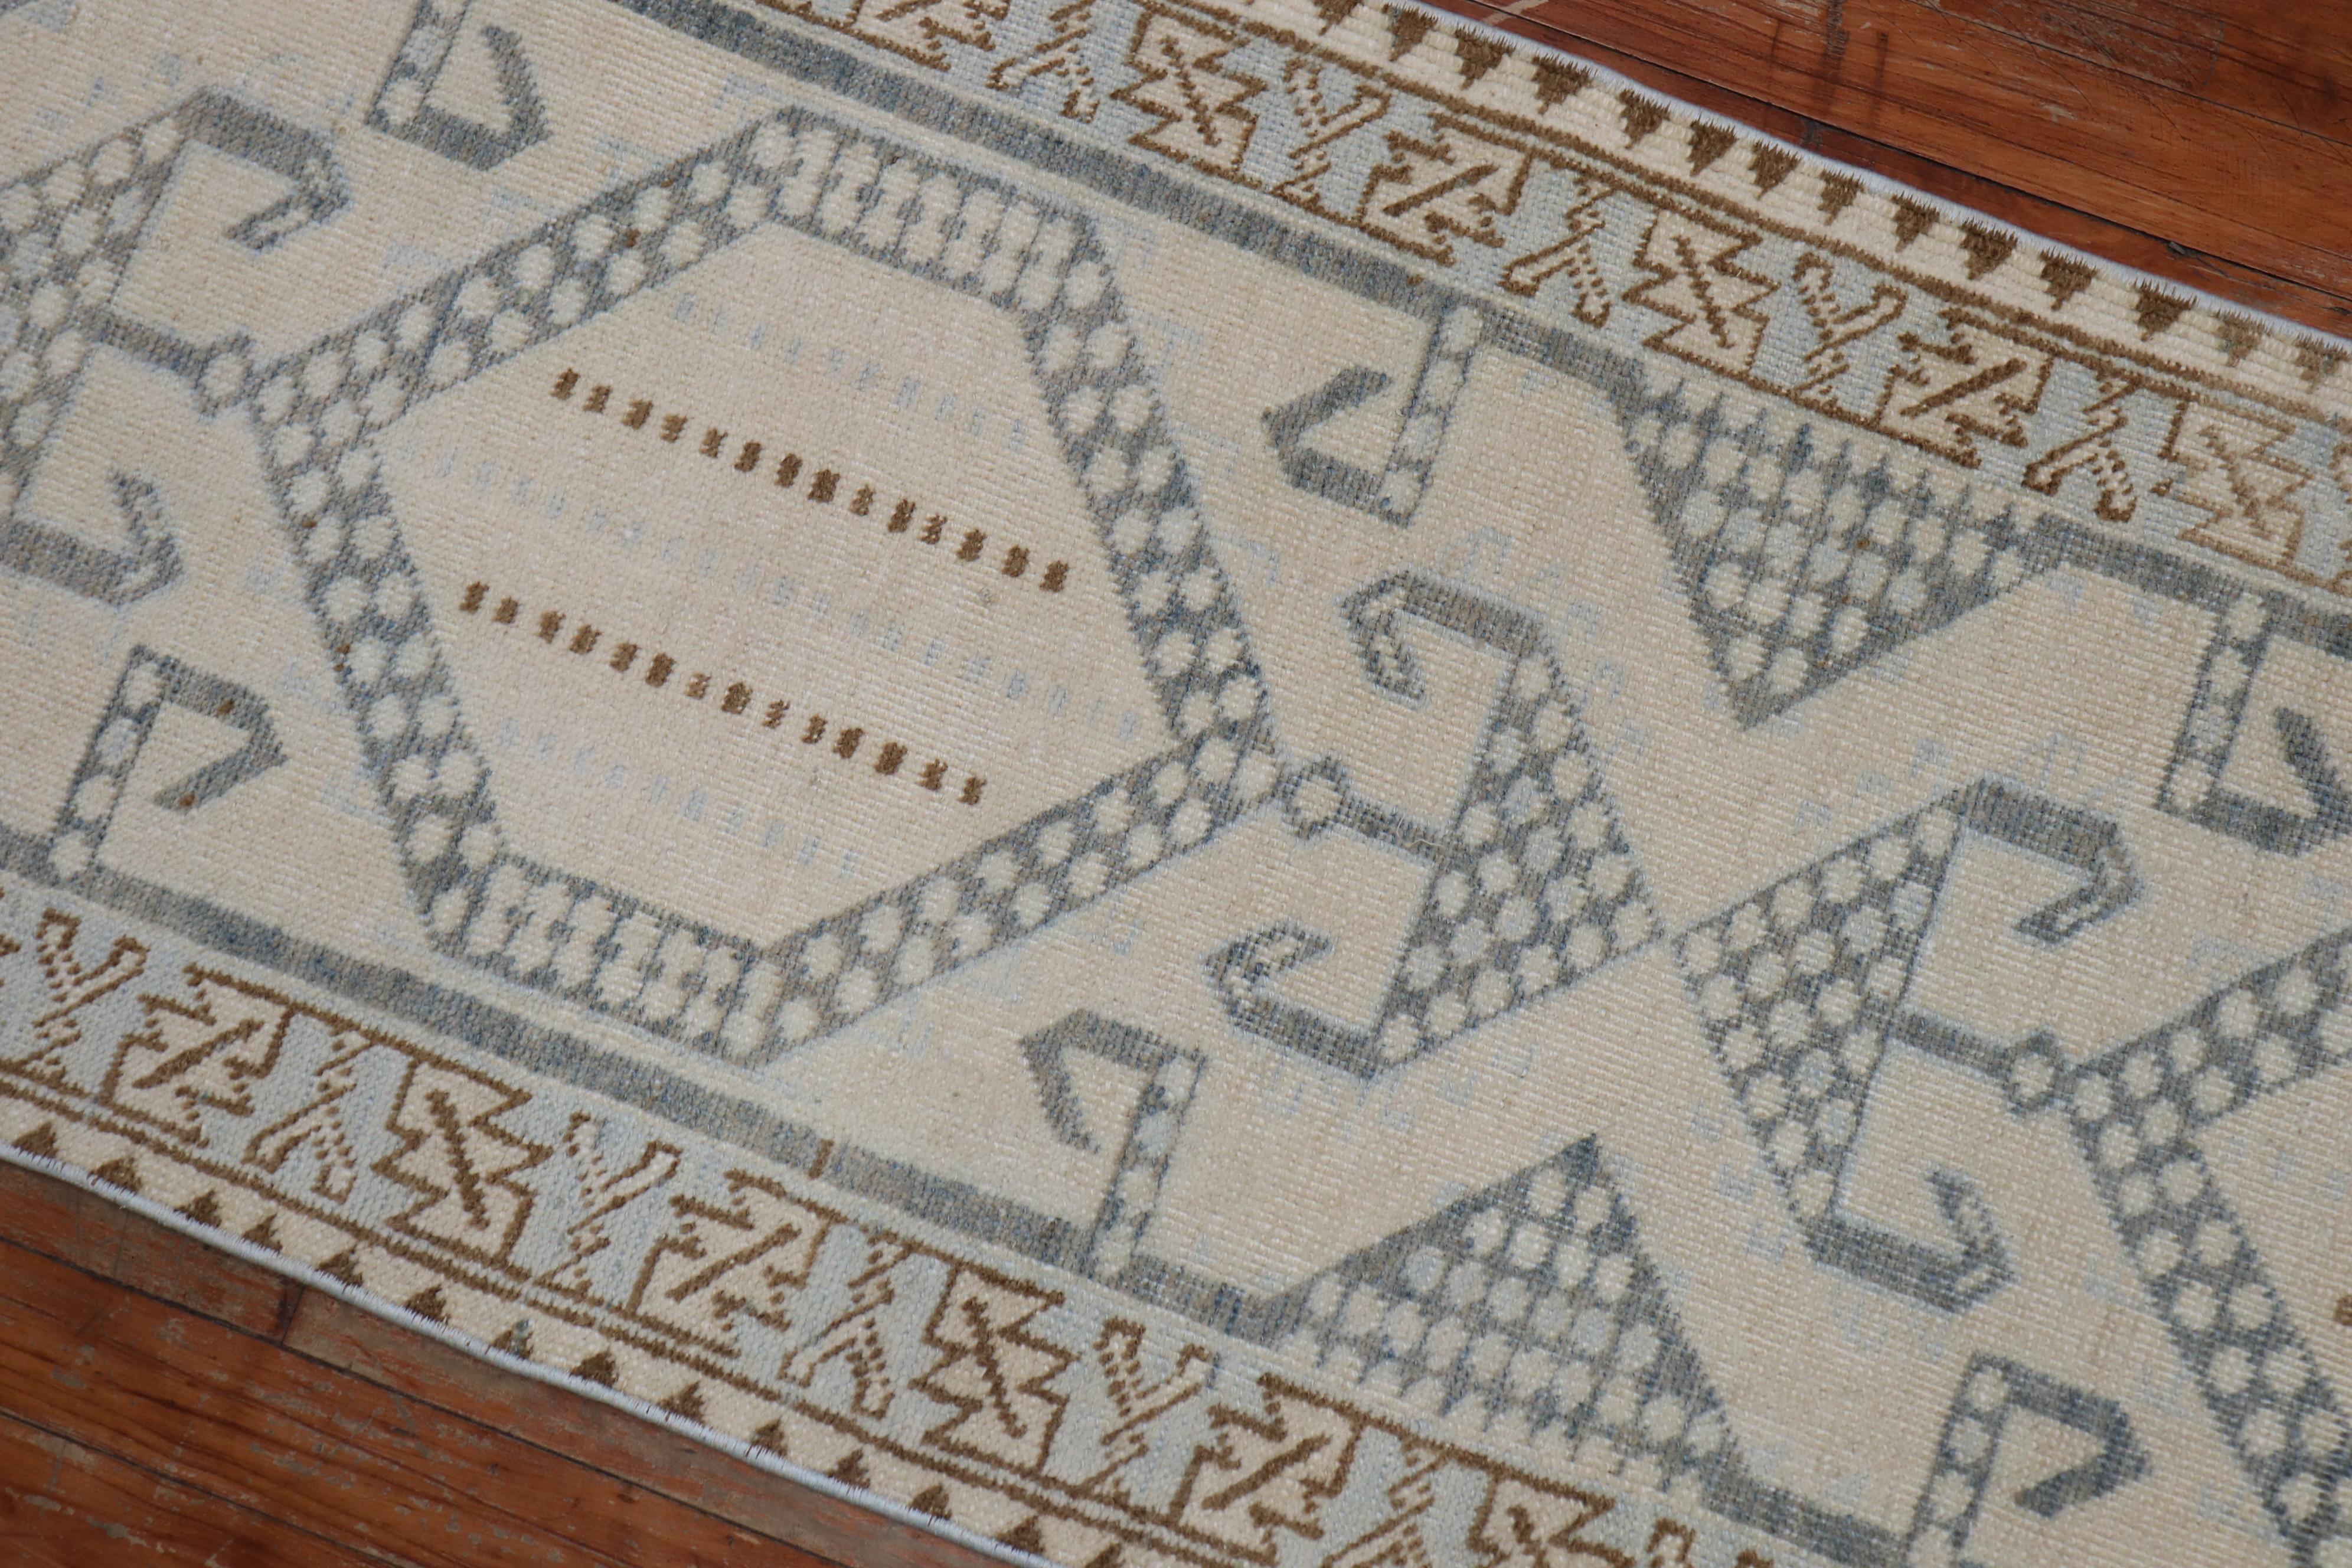 Narrow Neutral Color Persian Runner, Mid-20th Century For Sale 1